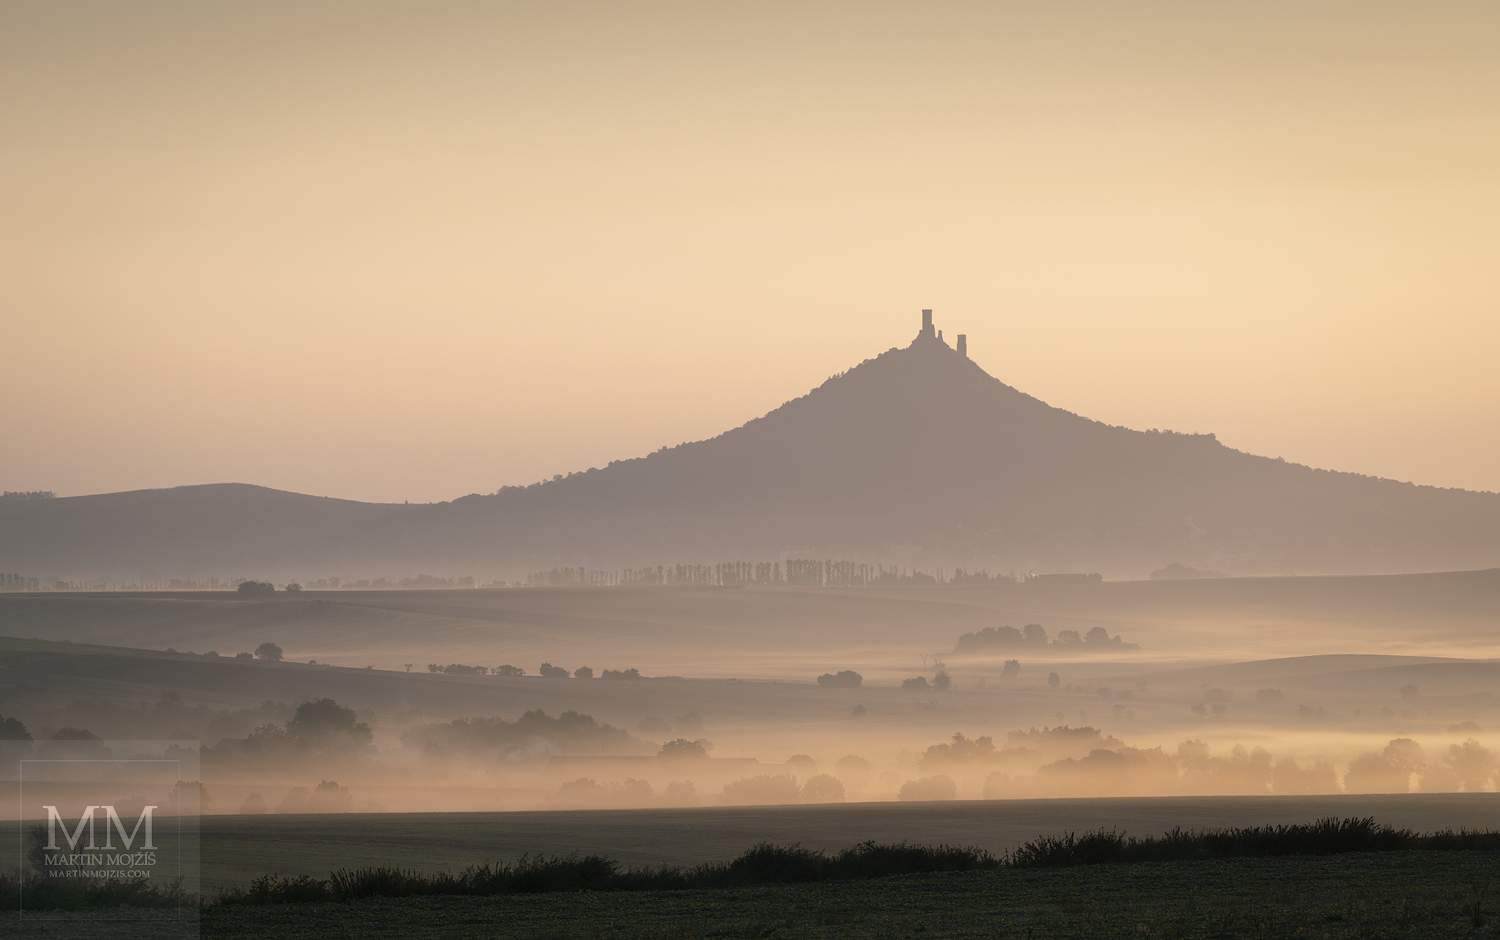 Landscape with morning mists, Hazmburk hill (Klapy) in the background. Fine Art large format photograph Light of a new day. Photographer Martin Mojzis.